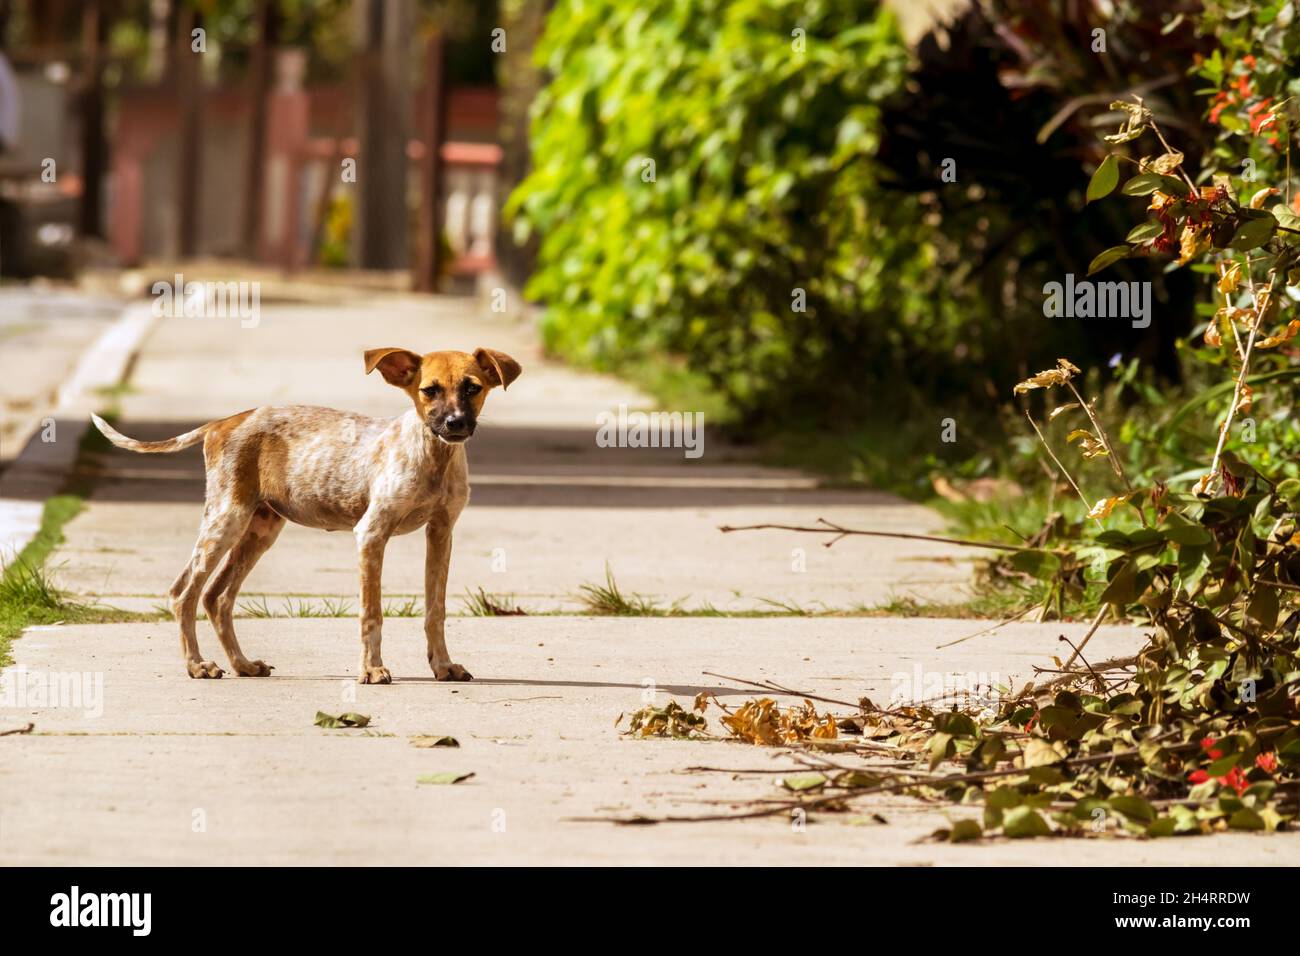 Lonely street puppy in a sidewalk of a country small town Stock Photo